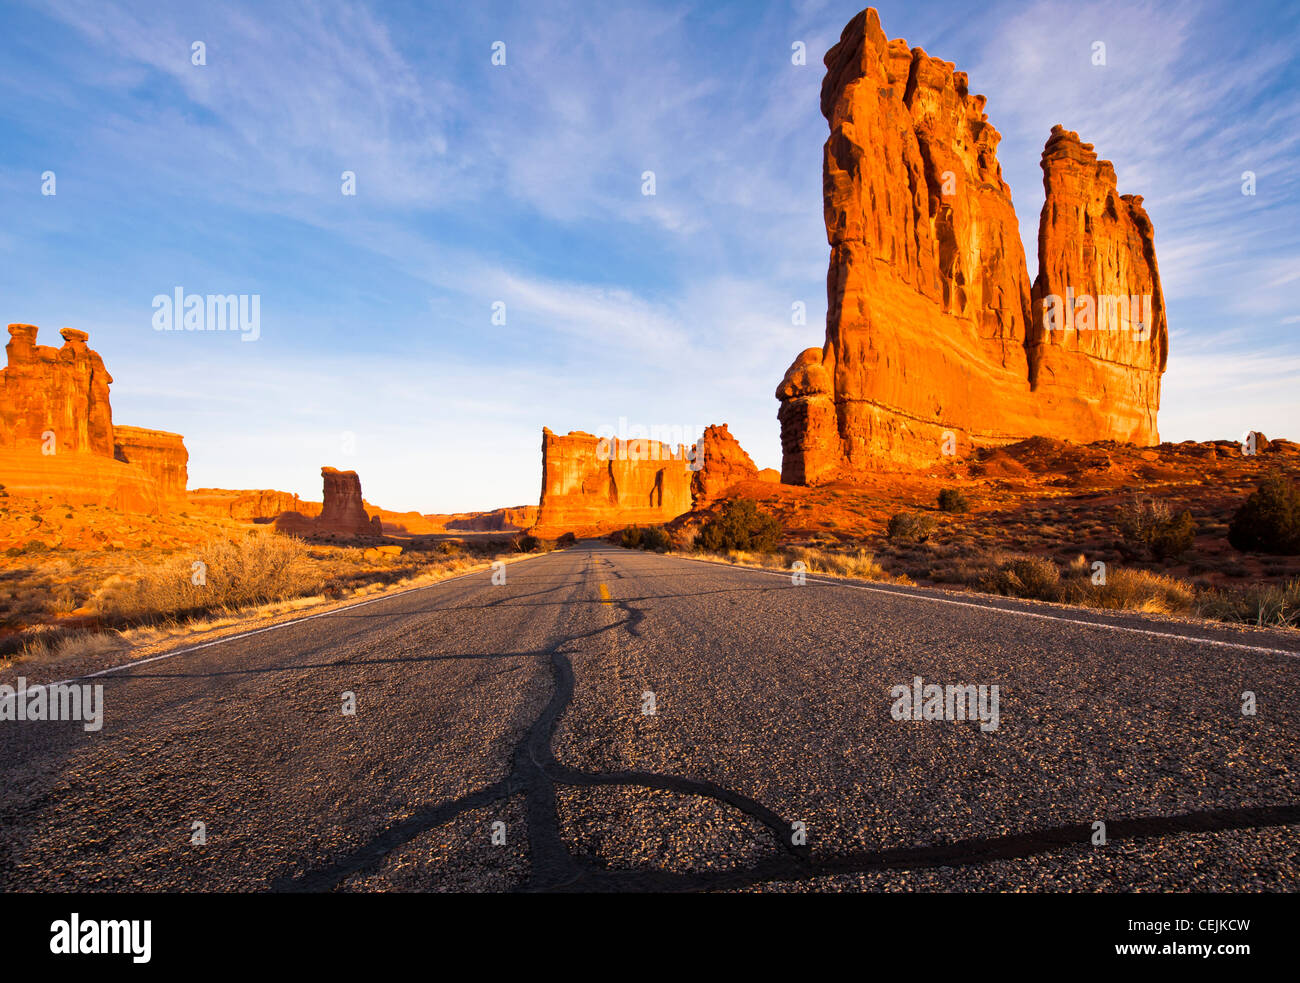 Arches National Park in Utah has many arches and huge buttes to photograph at sunrise or sunset. Stock Photo